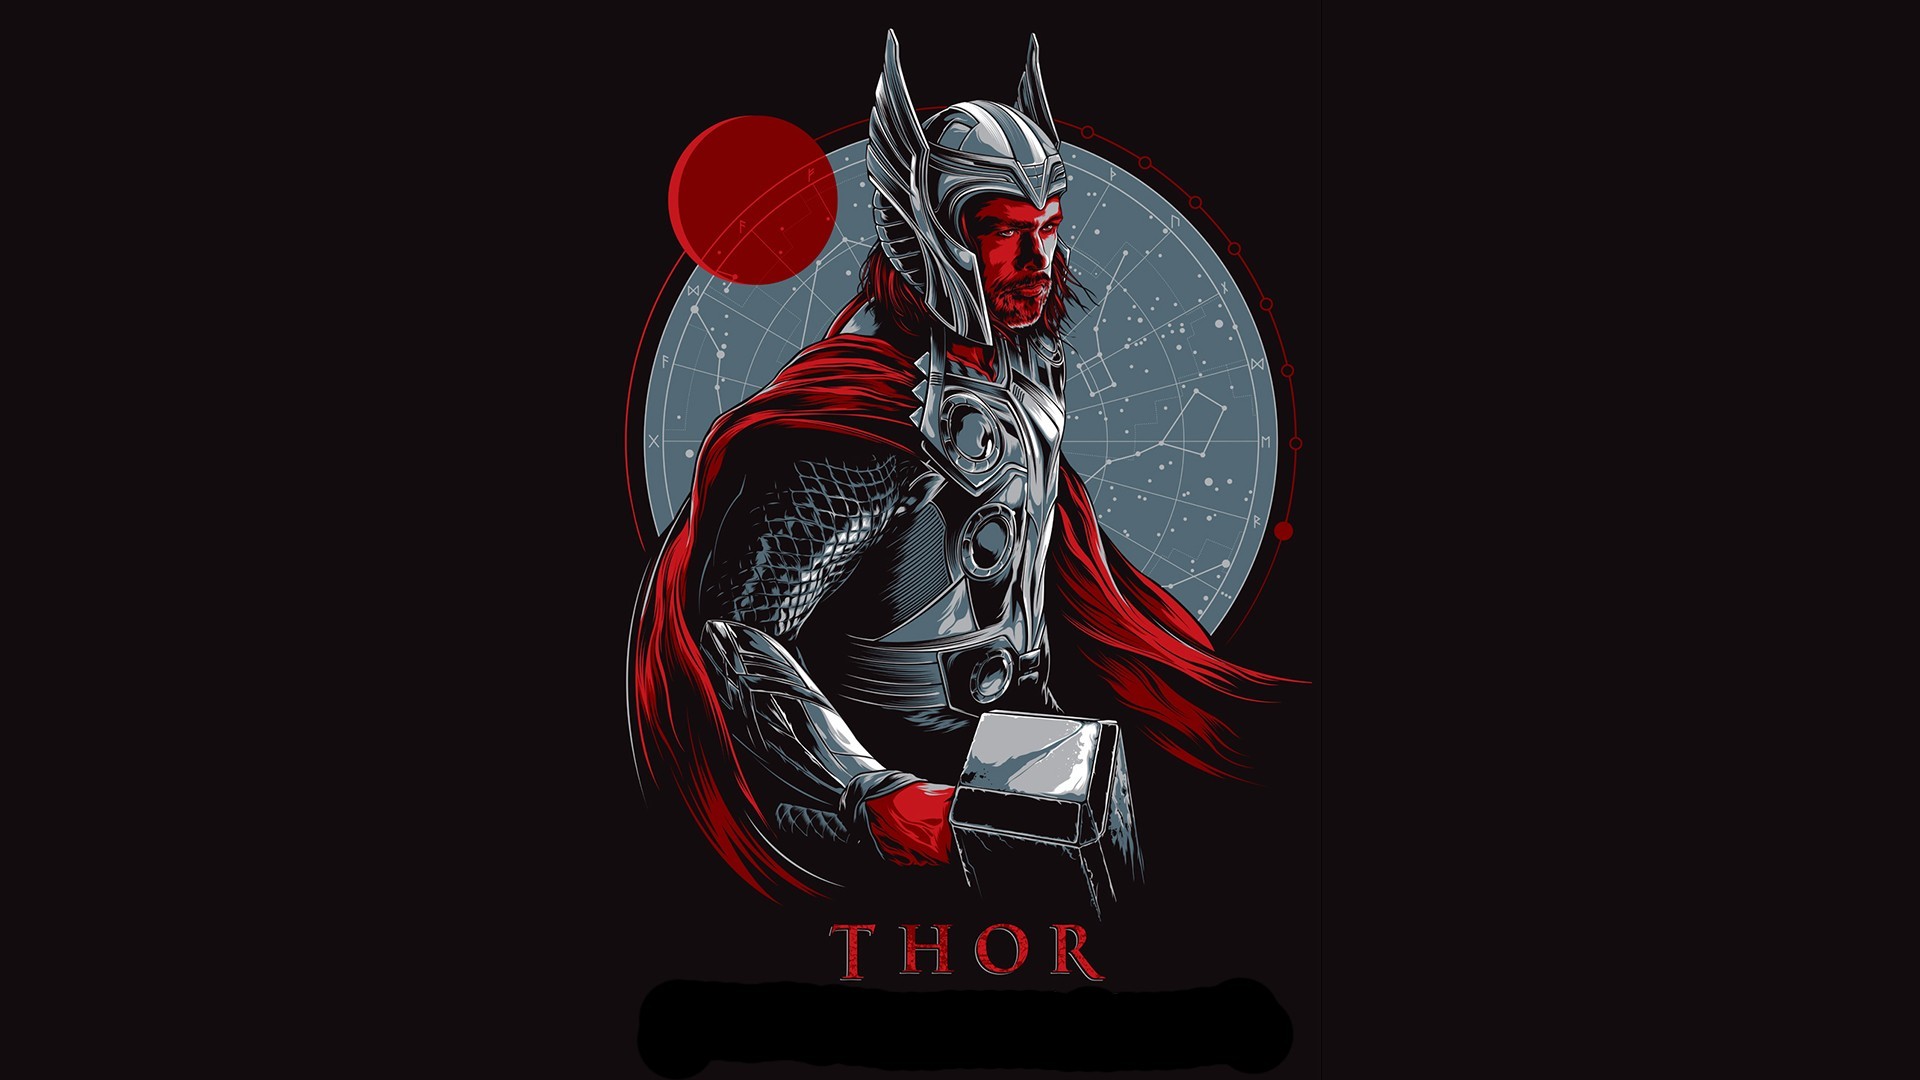 1920x1080 thor wallpapers | WallpaperUP